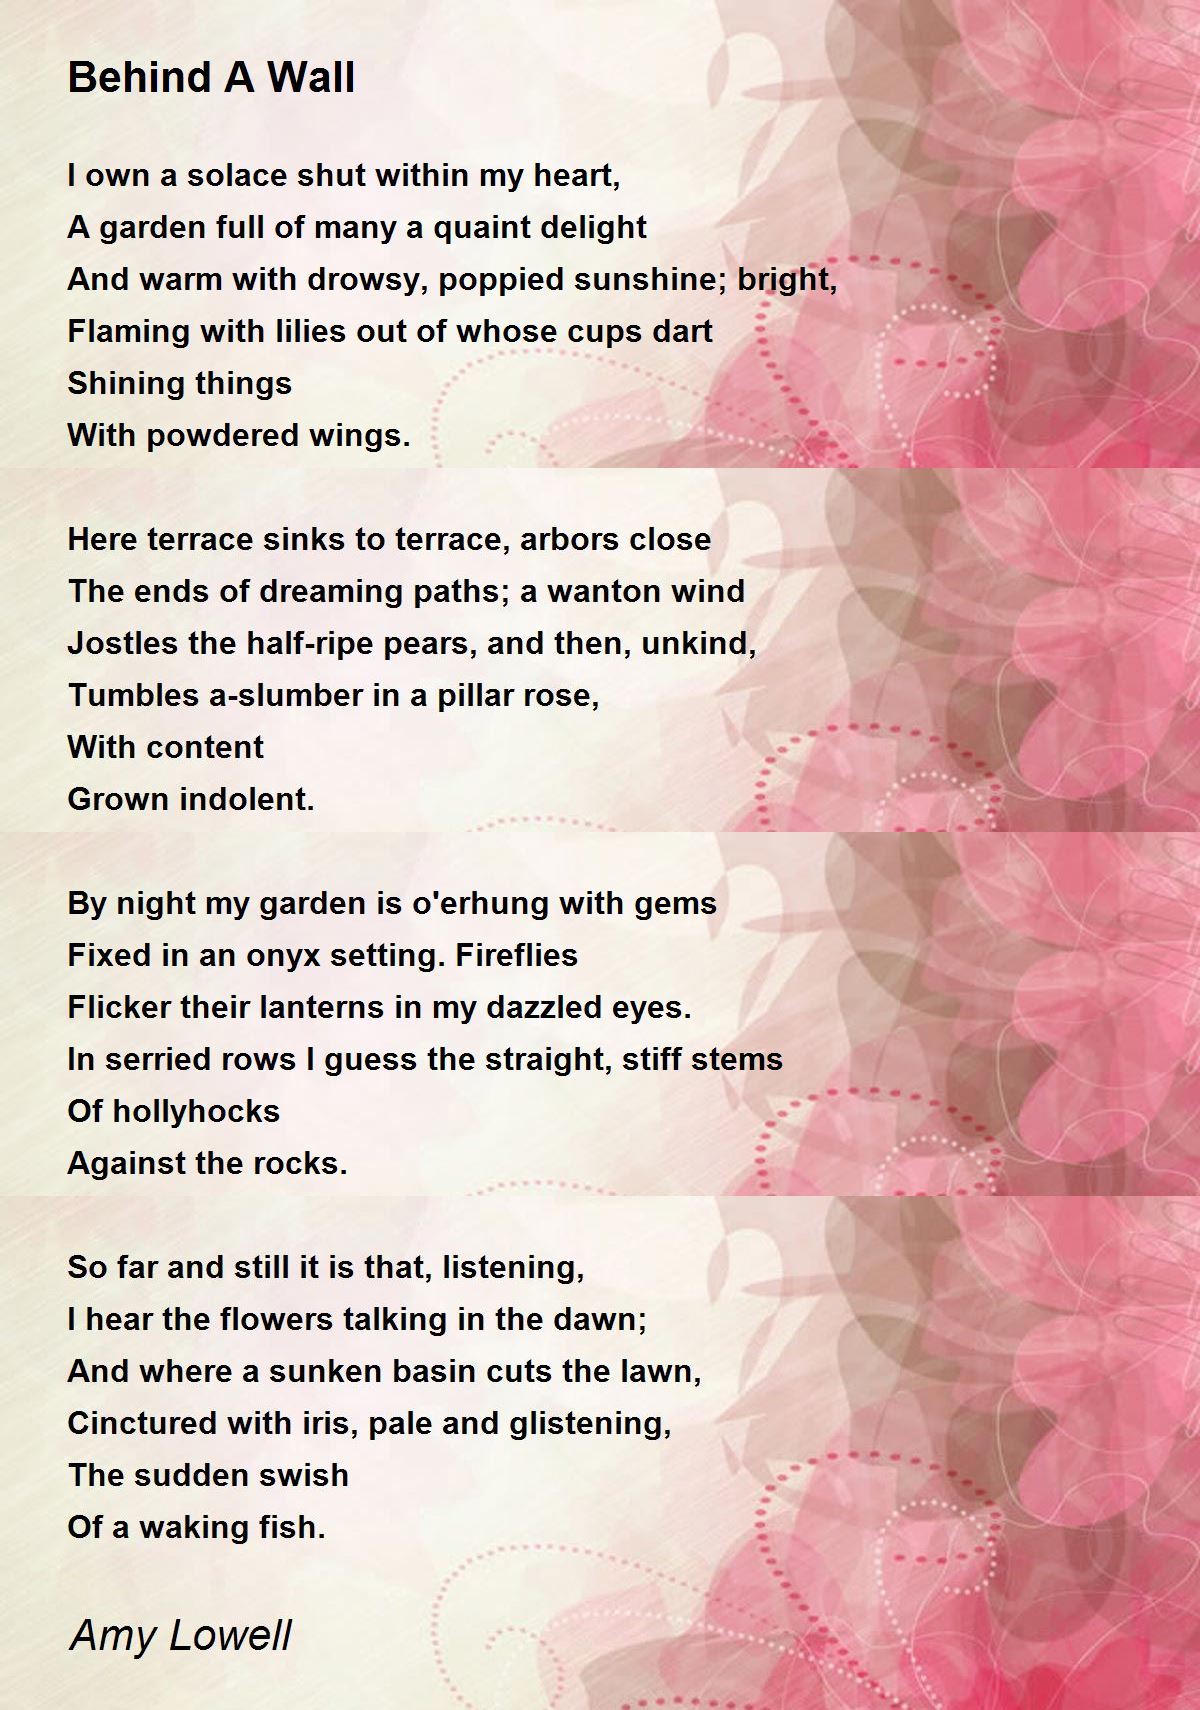 Behind A Wall Poem by Amy Lowell - Poem Hunter